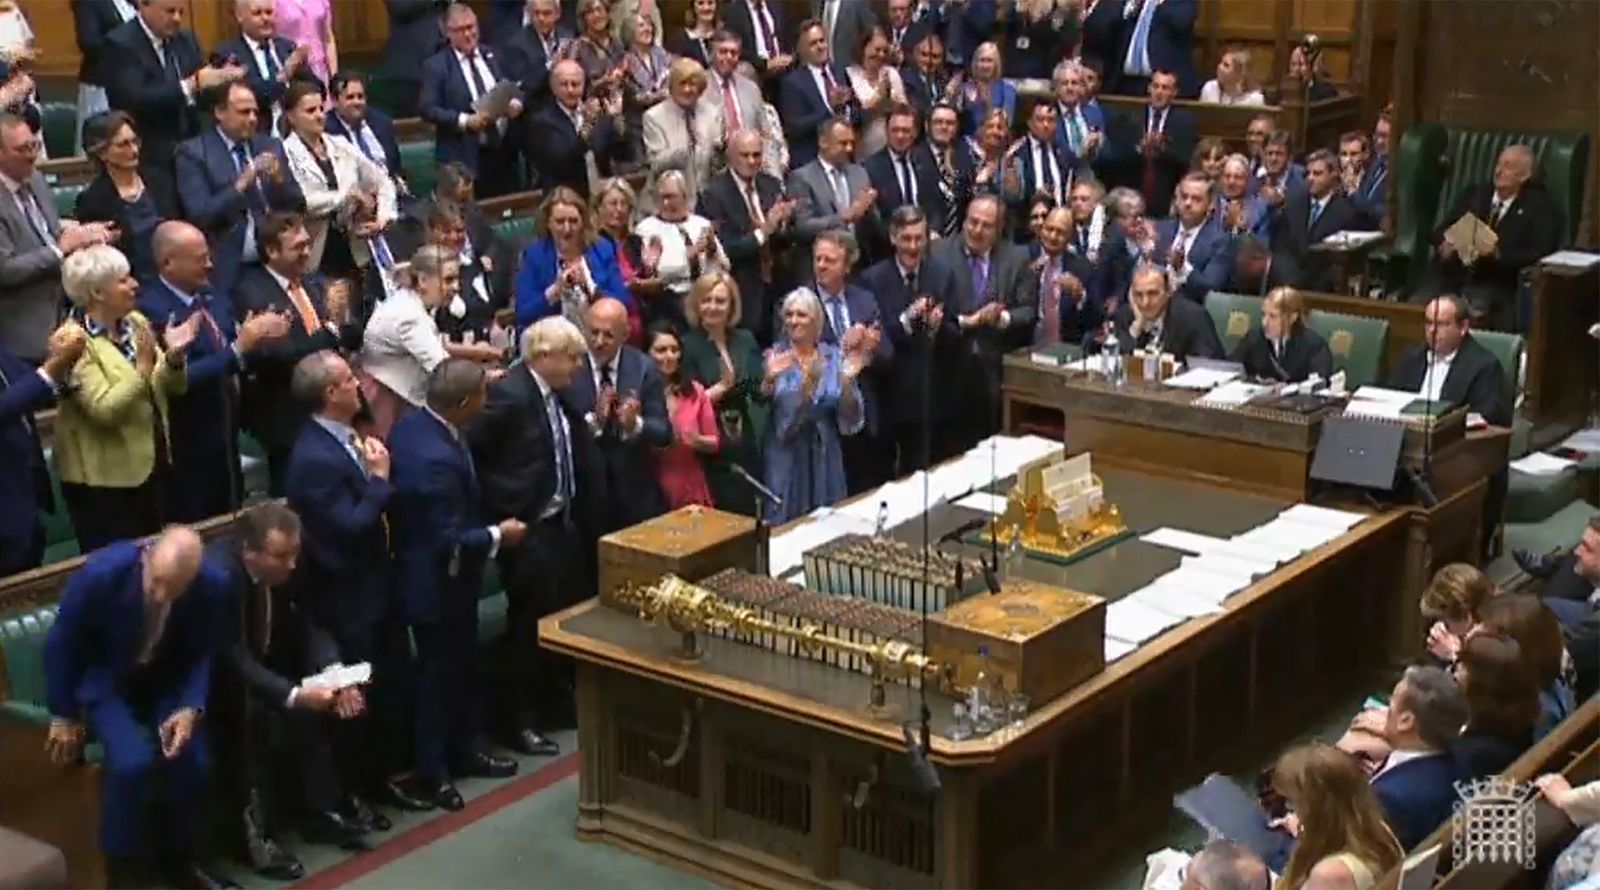 A video grab from footage broadcast by the UK Parliament's Parliamentary Recording Unit (PRU) shows members of Parliament applauding Britain's Prime Minister Boris Johnson as he leaves at the end of his last weekly Prime Minister's Questions (PMQs) session at the House of Commons, in London, on July 20, 2022. - The final two candidates to become UK prime minister will be decided on July 20, 2022, with Foreign Secretary Liz Truss and Penny Mordaunt battling it out to make an expected runoff against frontrunner Rishi Sunak. (Photo by PRU / AFP) / RESTRICTED TO EDITORIAL USE - MANDATORY CREDIT 